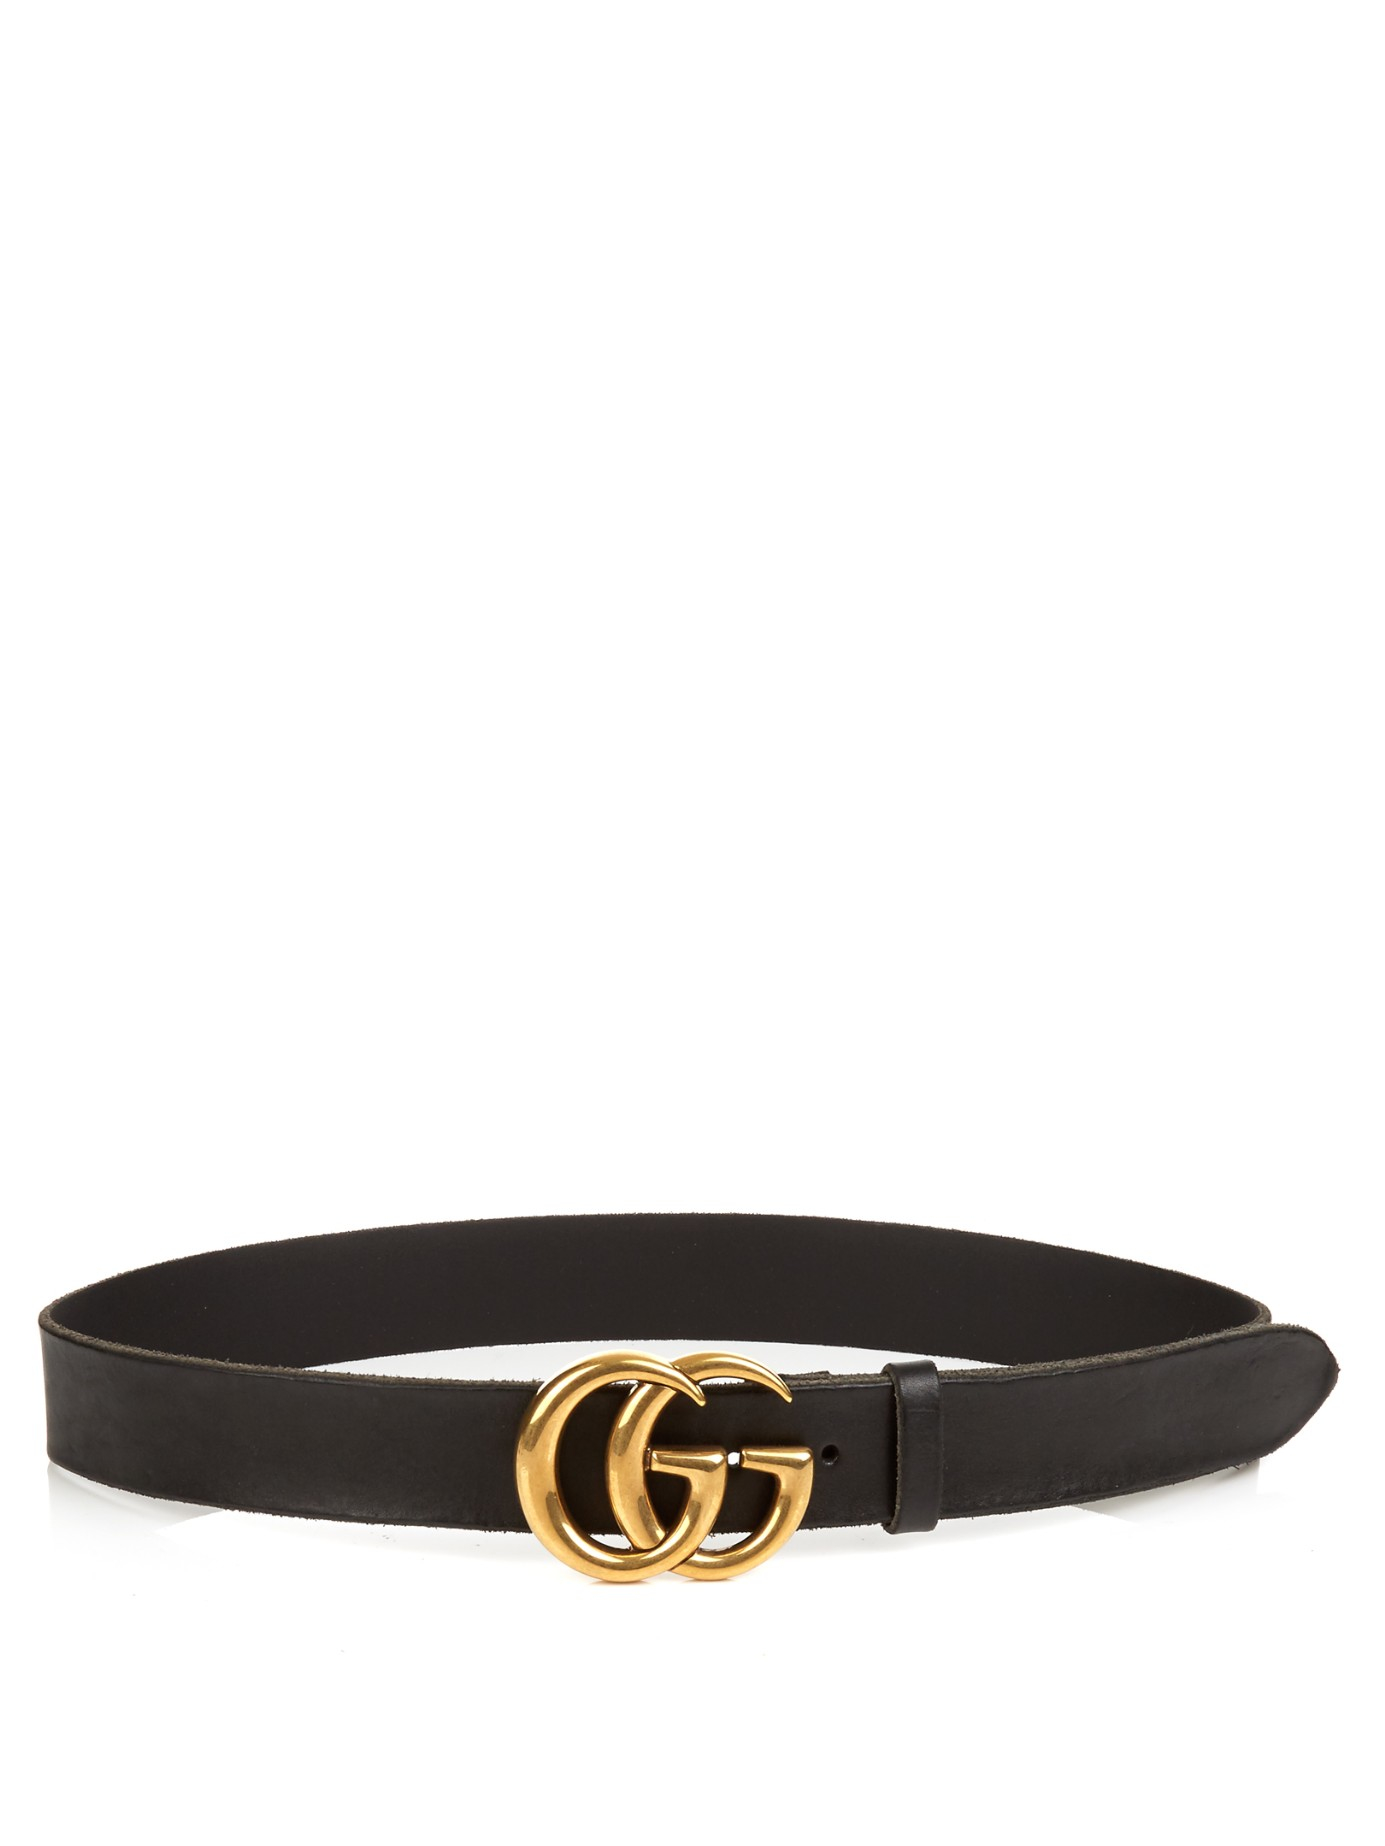 Lyst - Gucci Gg-logo Leather Belt in Brown for Men